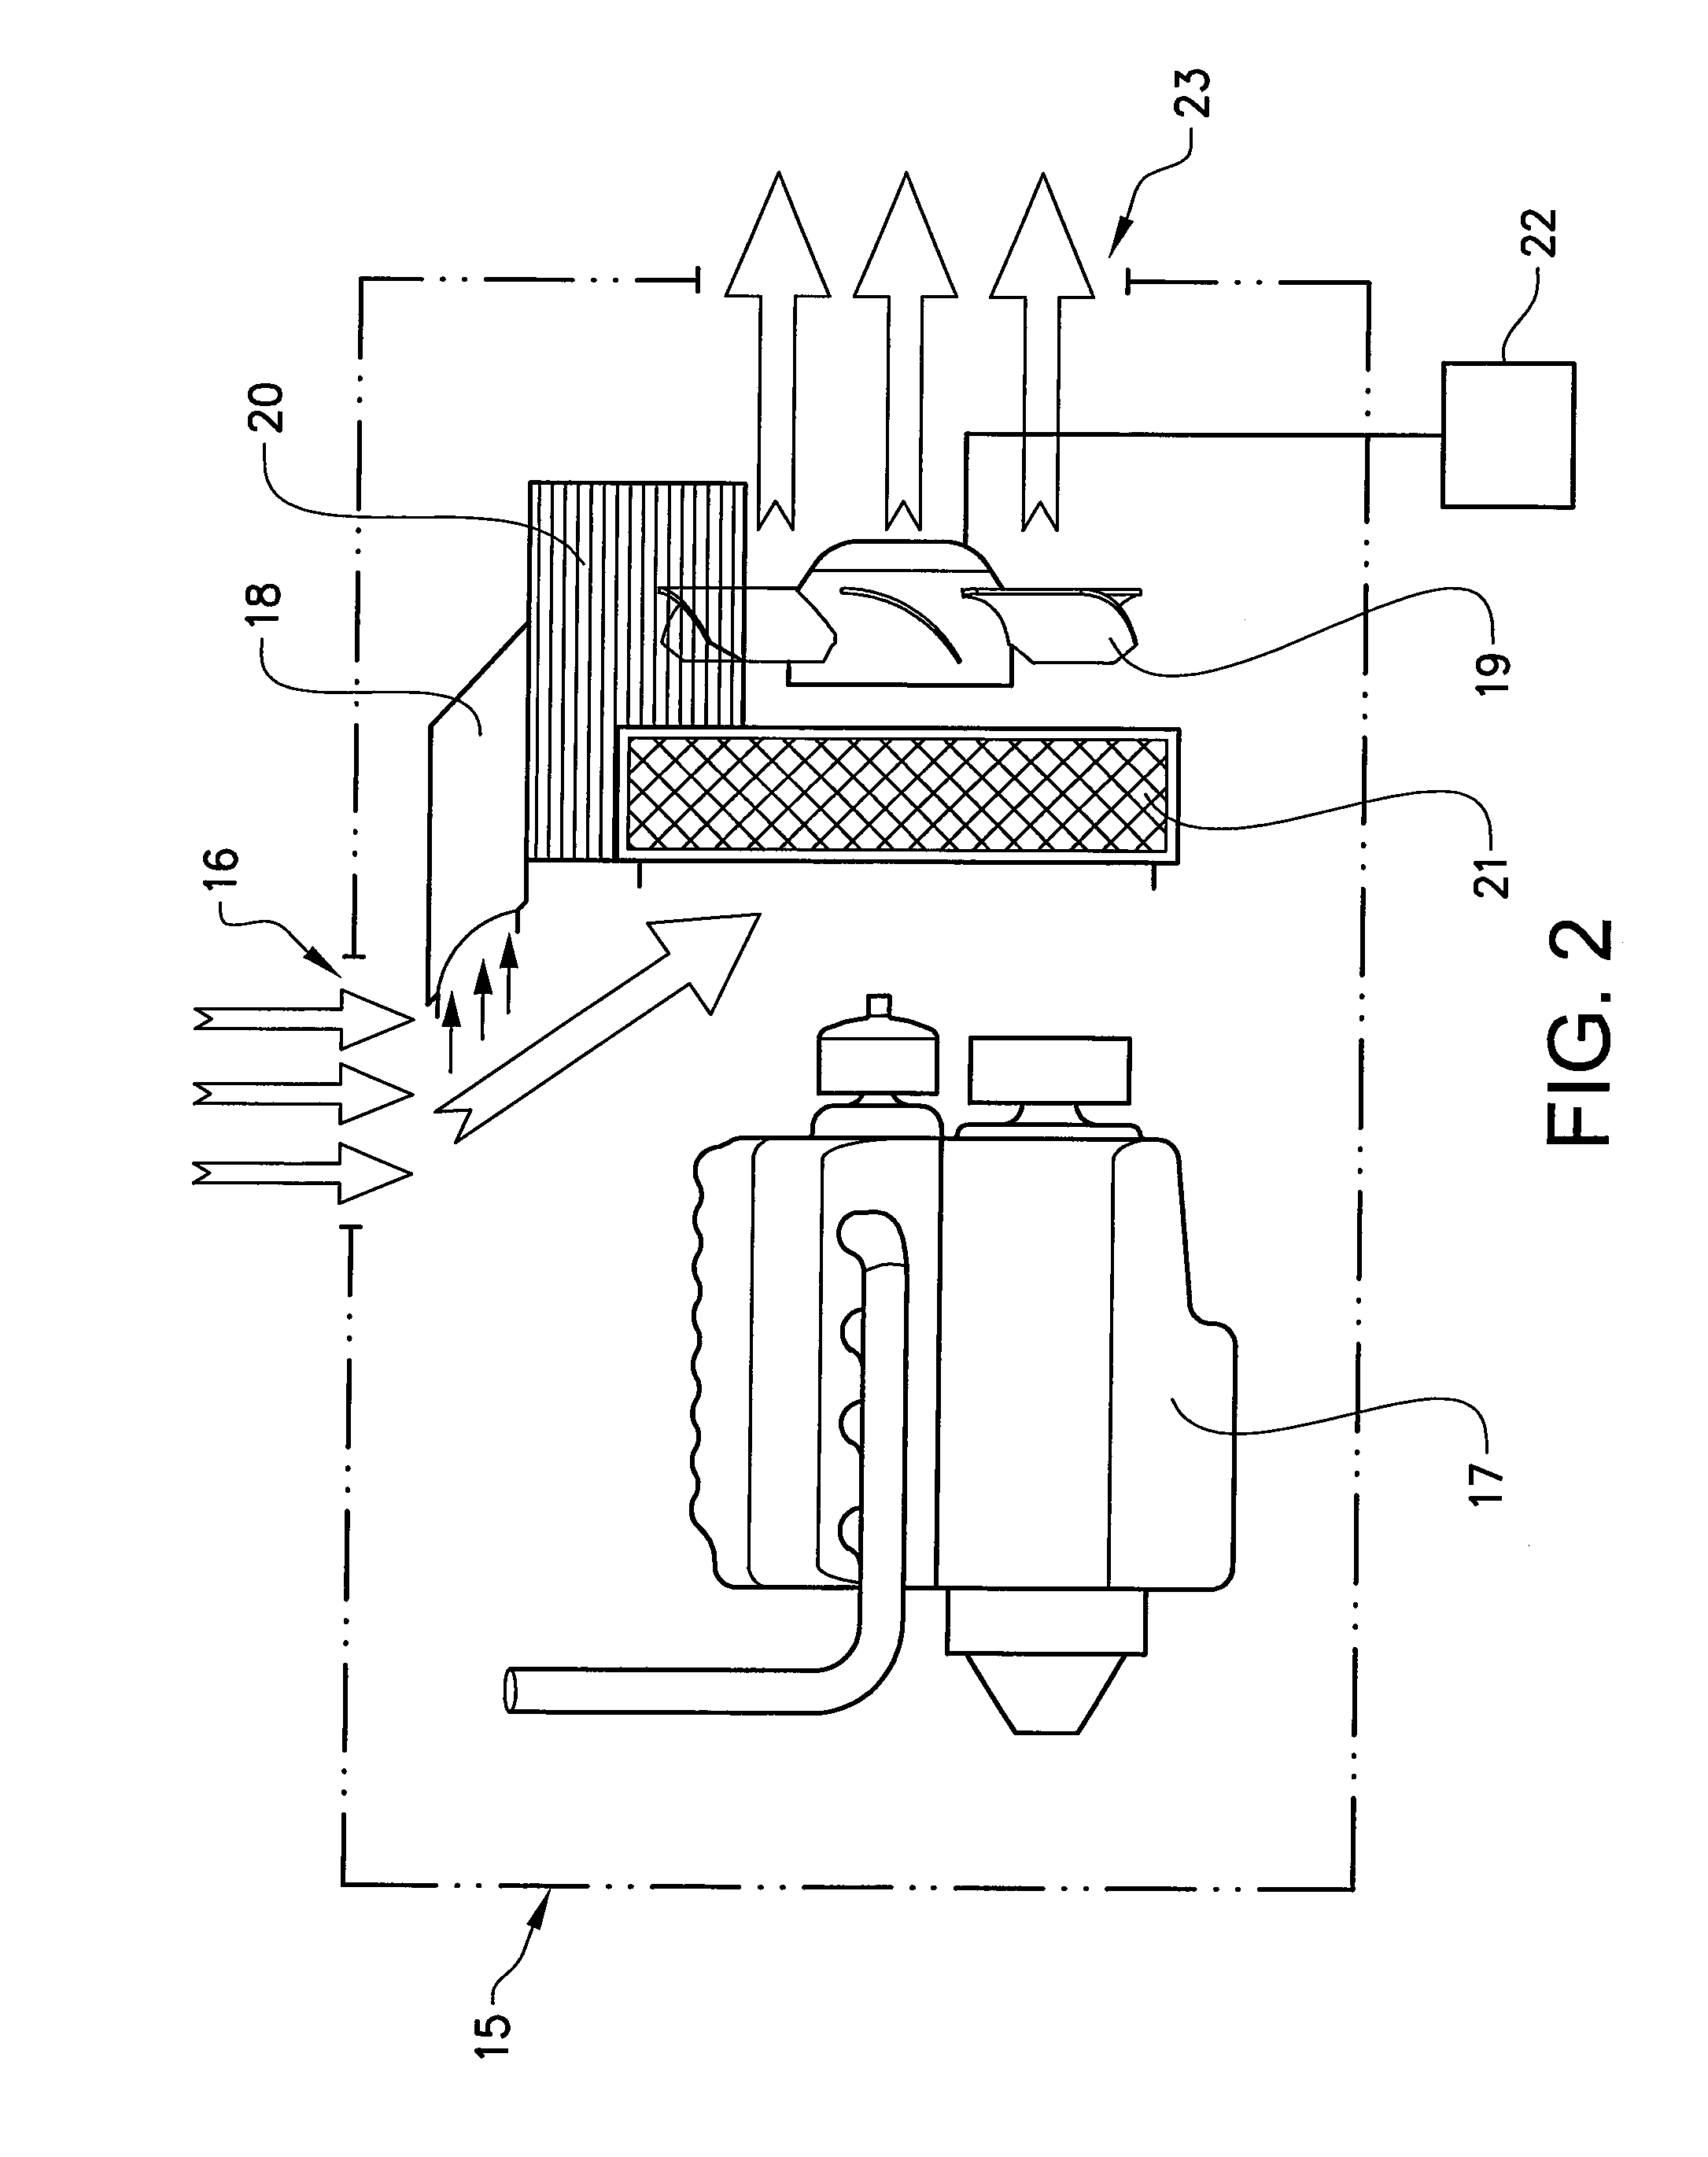 Arrangement and a method for controlling the temperature of air being fed to a vehicle engine